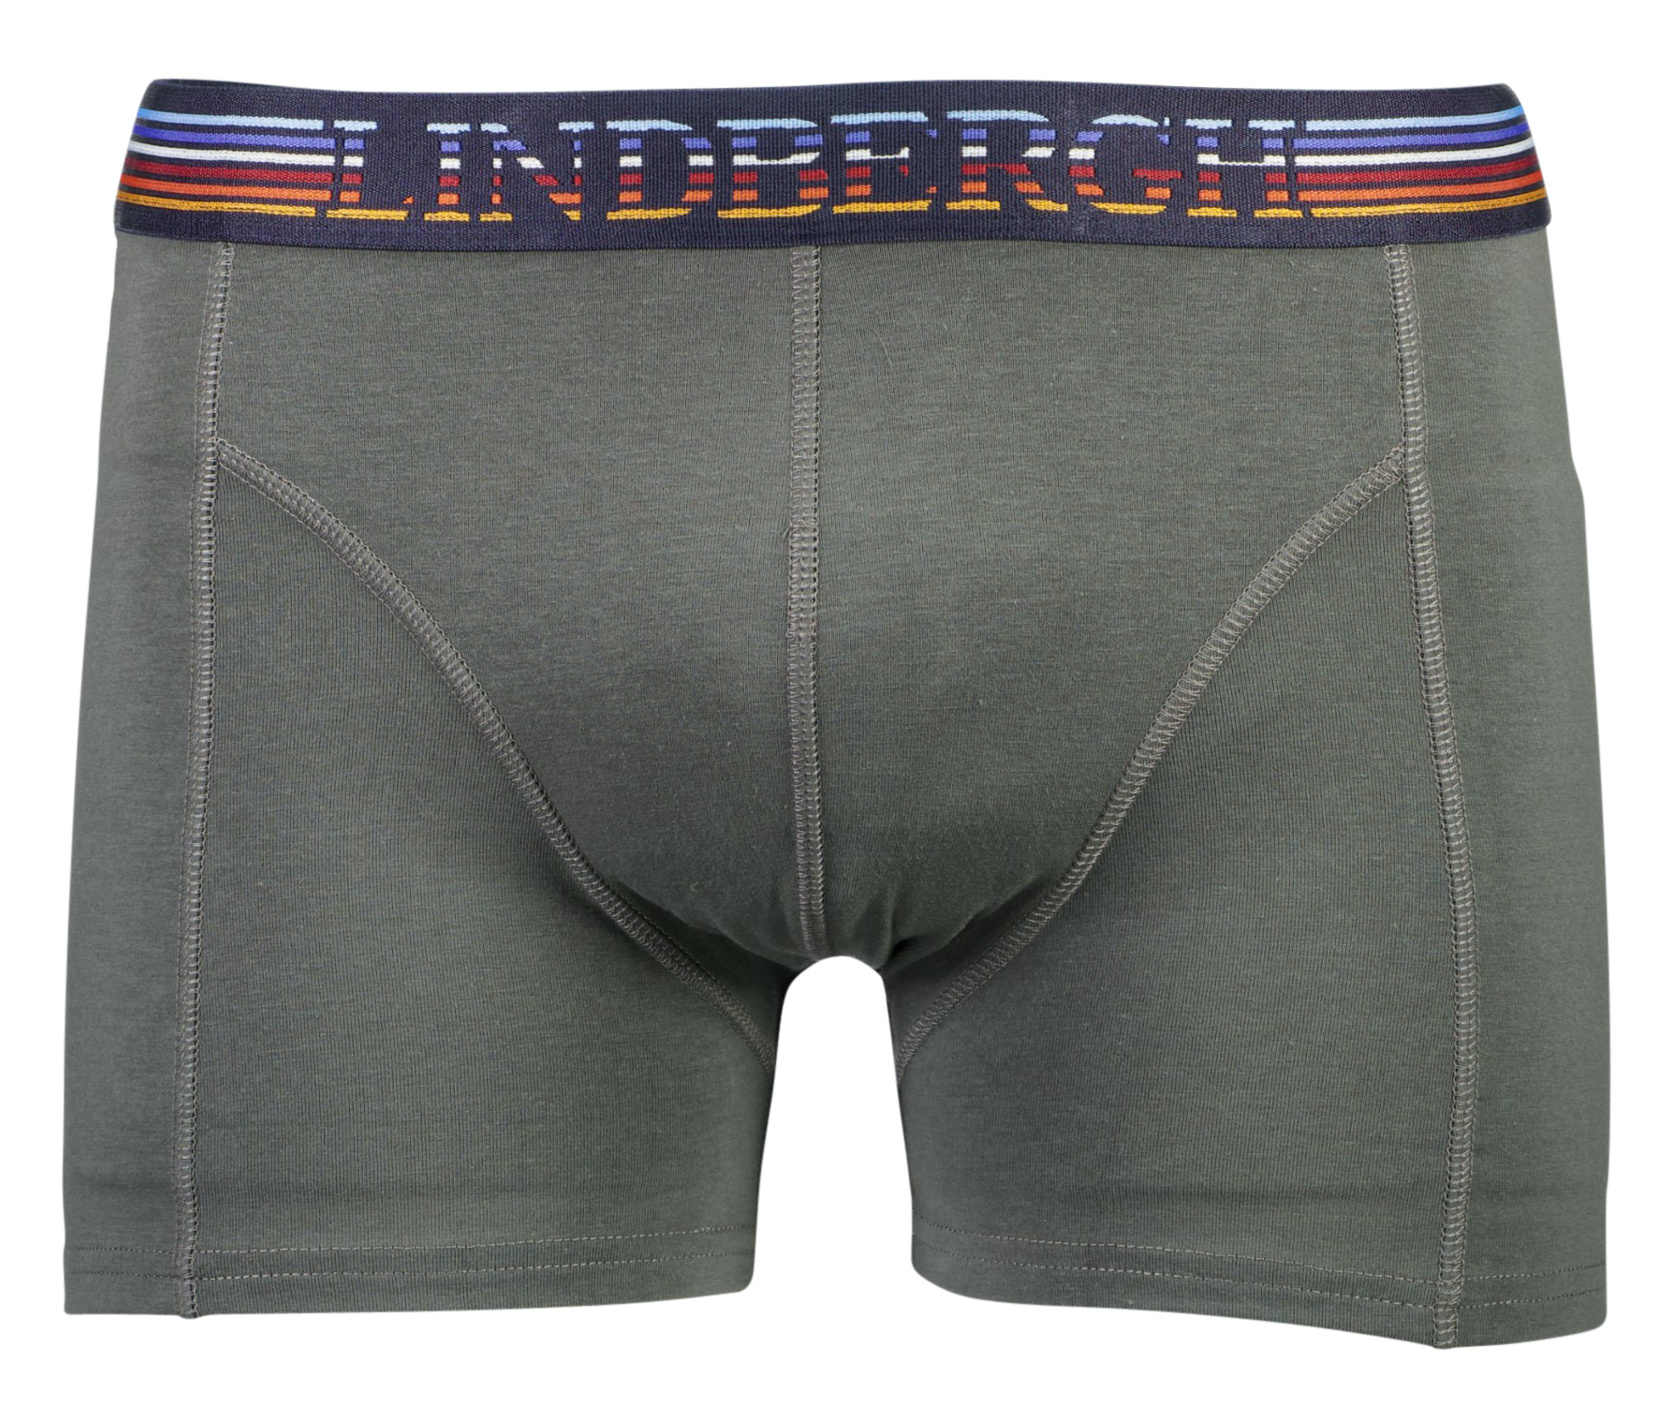 Mixed Bamboo Boxers 3-Pack Style: 30-98937US - LINDBERGH